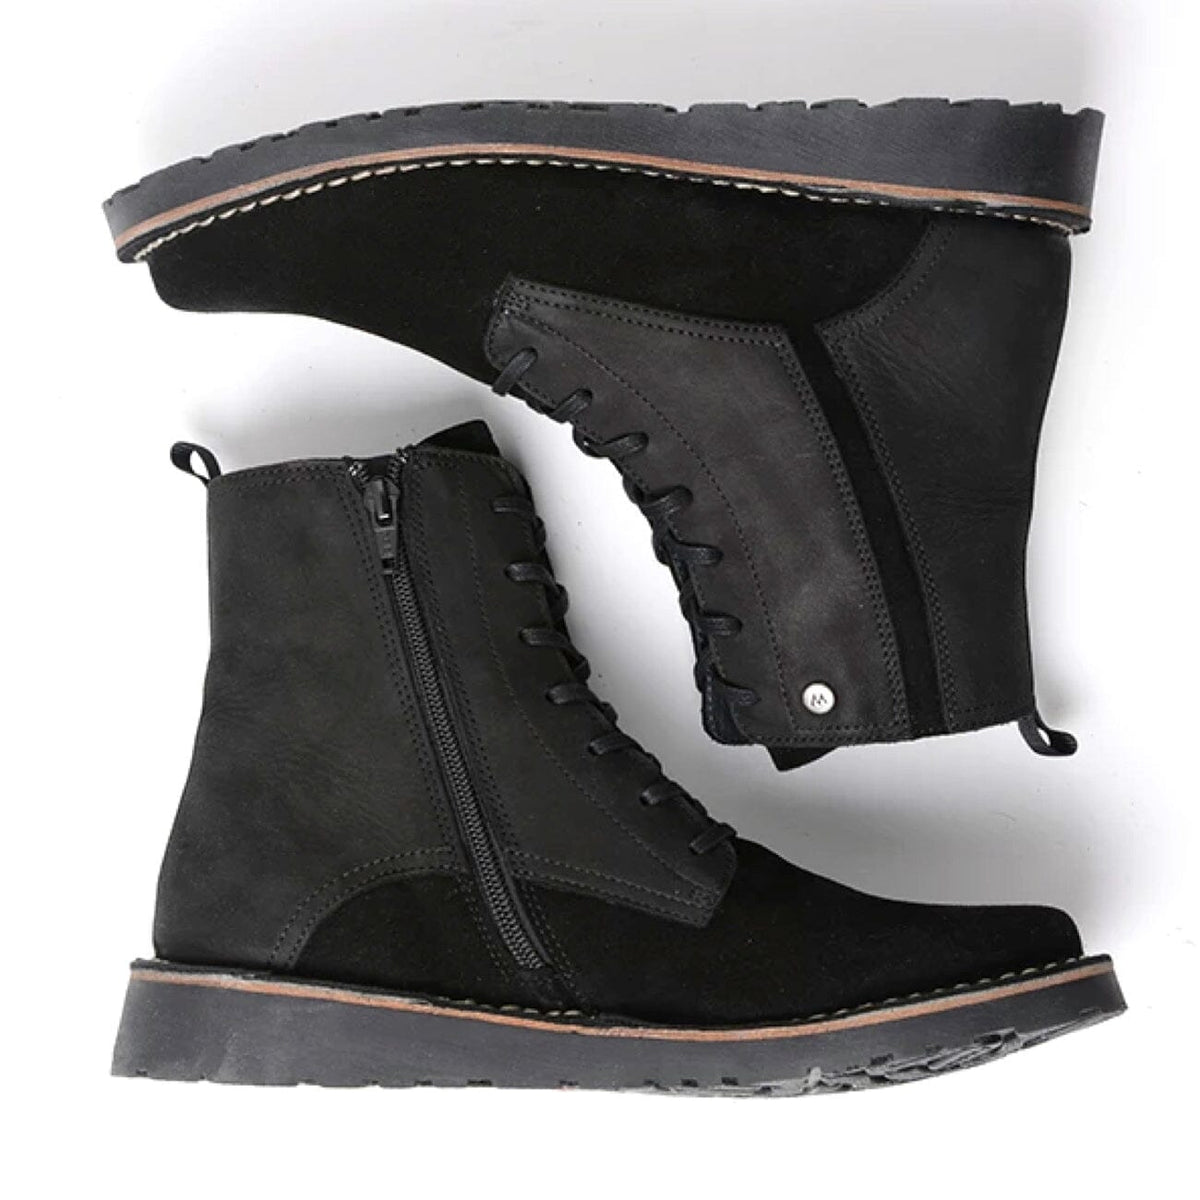 Wolky, Wagga Wagga, Boots, Suede Leather, Black Boots Wolky 